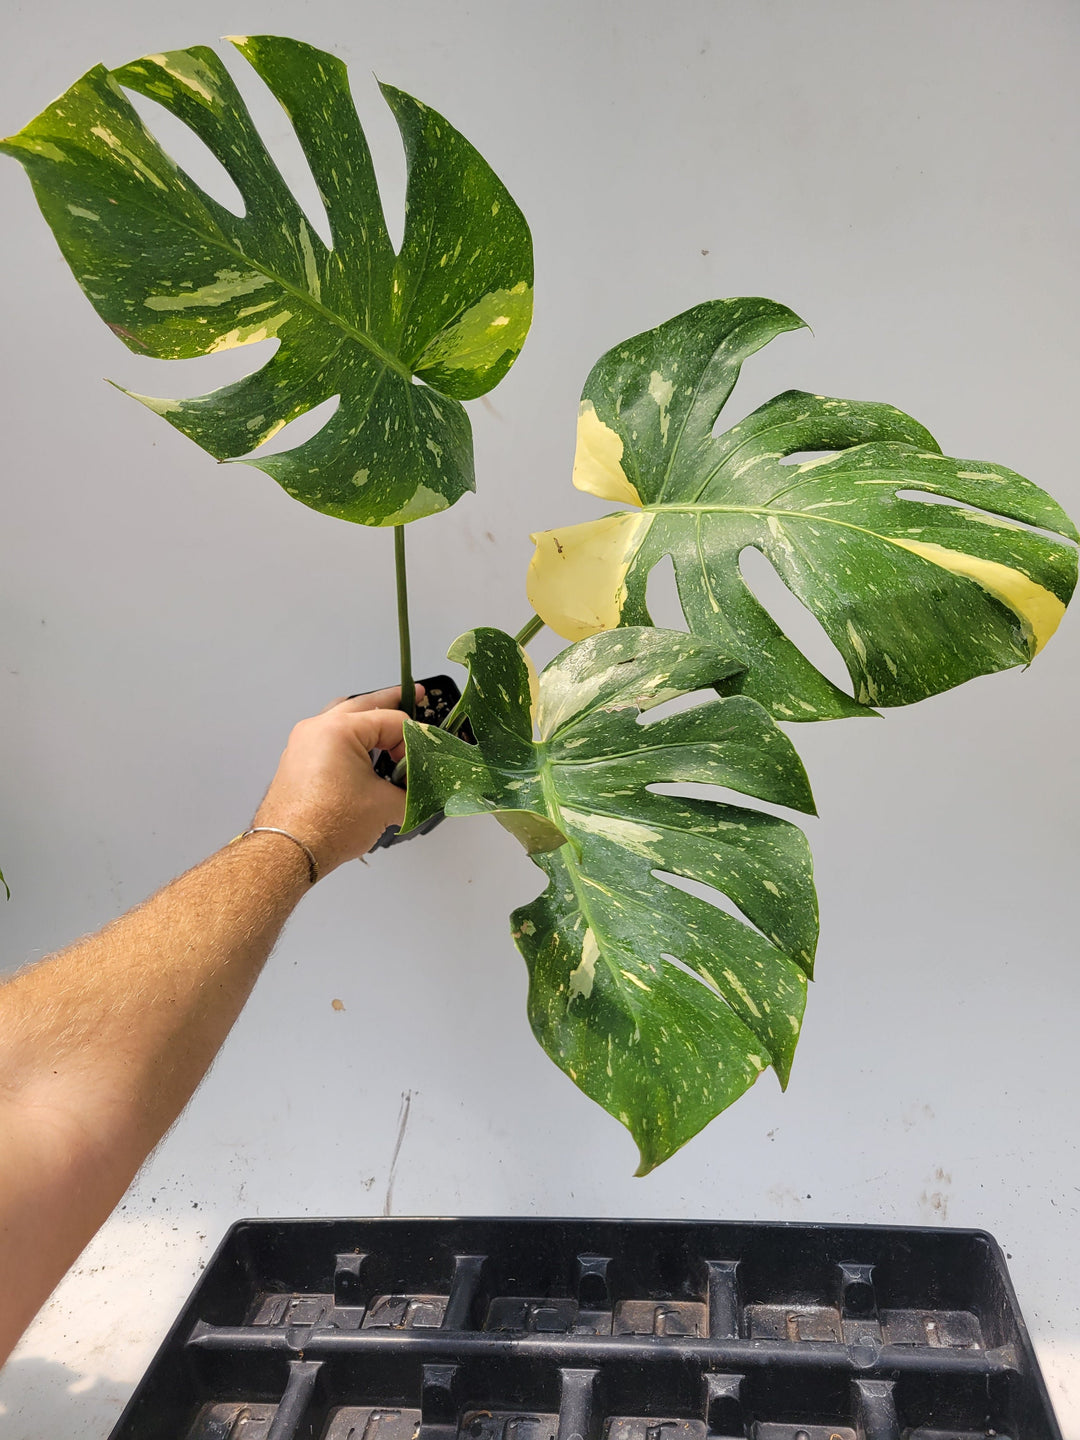 Monstera Thai Constellation,  XL size,  Highly variegated, Japanese Cultivar, exact plant pictured  US Seller #t43